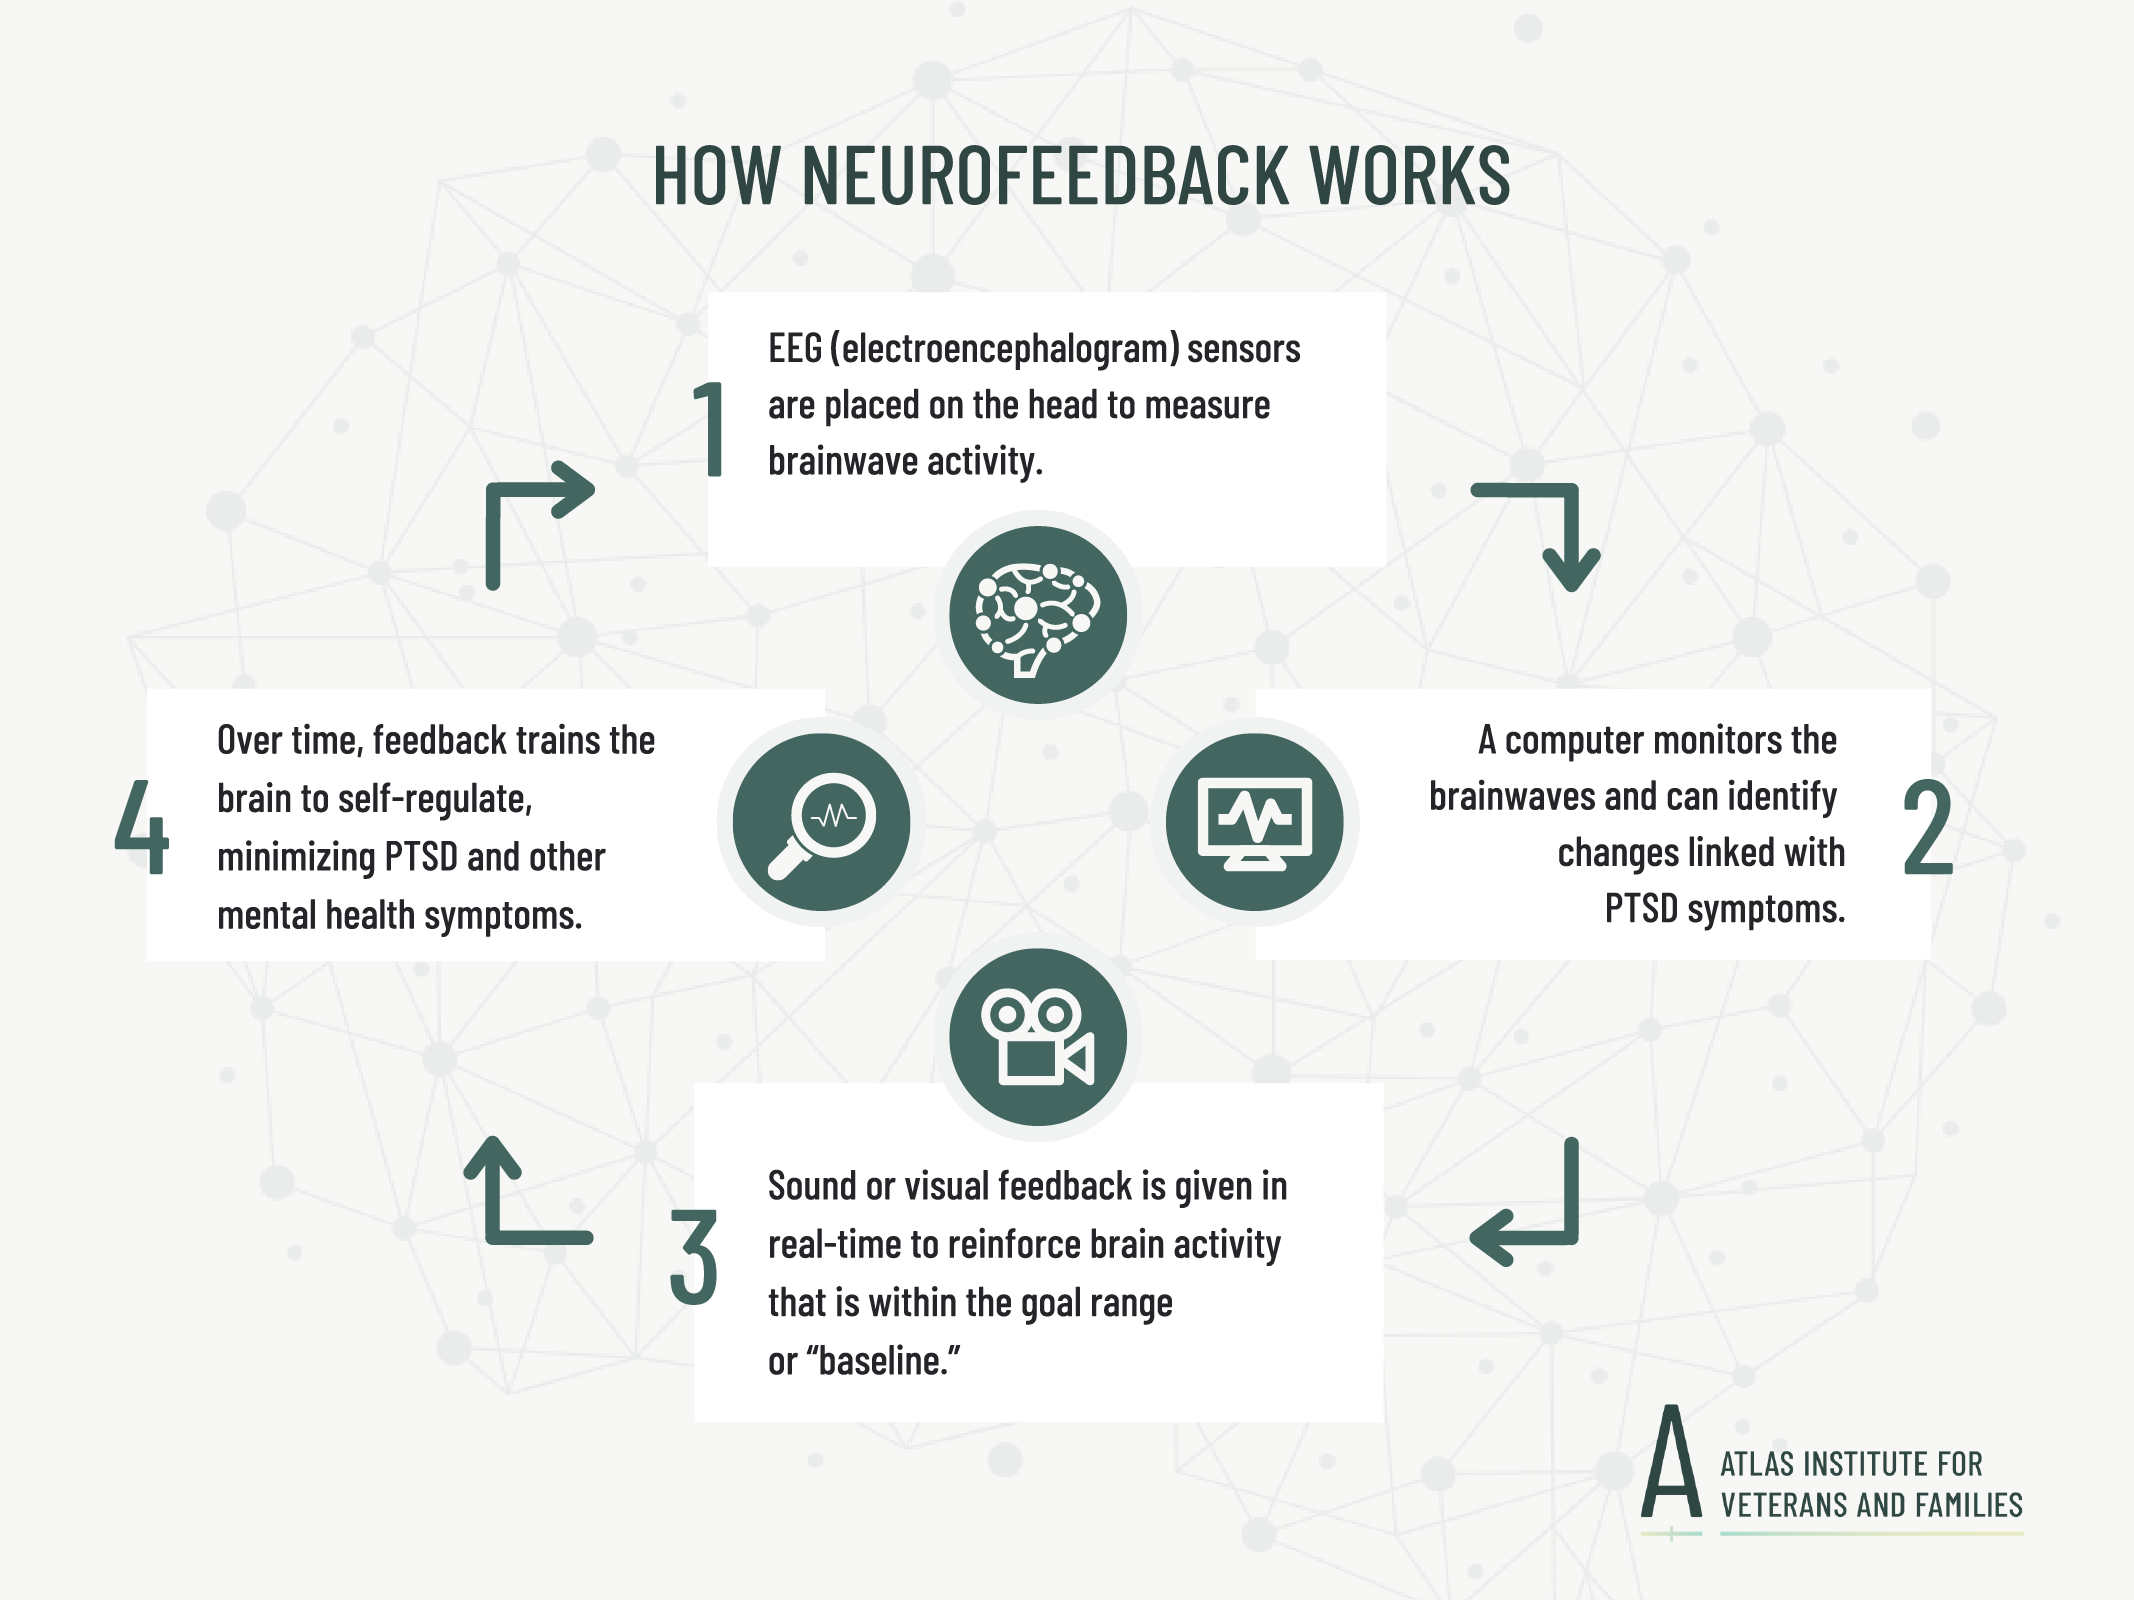 How neurofeedback works : 1) EEG (electroencephalogram) sensors are placed on the head to measure brainwave activity; 2) A computer monitors the brainwaves and can identify changes linked with PTSD symptoms; 3) Sound or visual feedback is given in real-time to reinforce brain activity that is within the goal range or “baseline”; 4) Over time, feedback trains the brain to self-regulate, minimizing PTSD and other mental health symptoms.